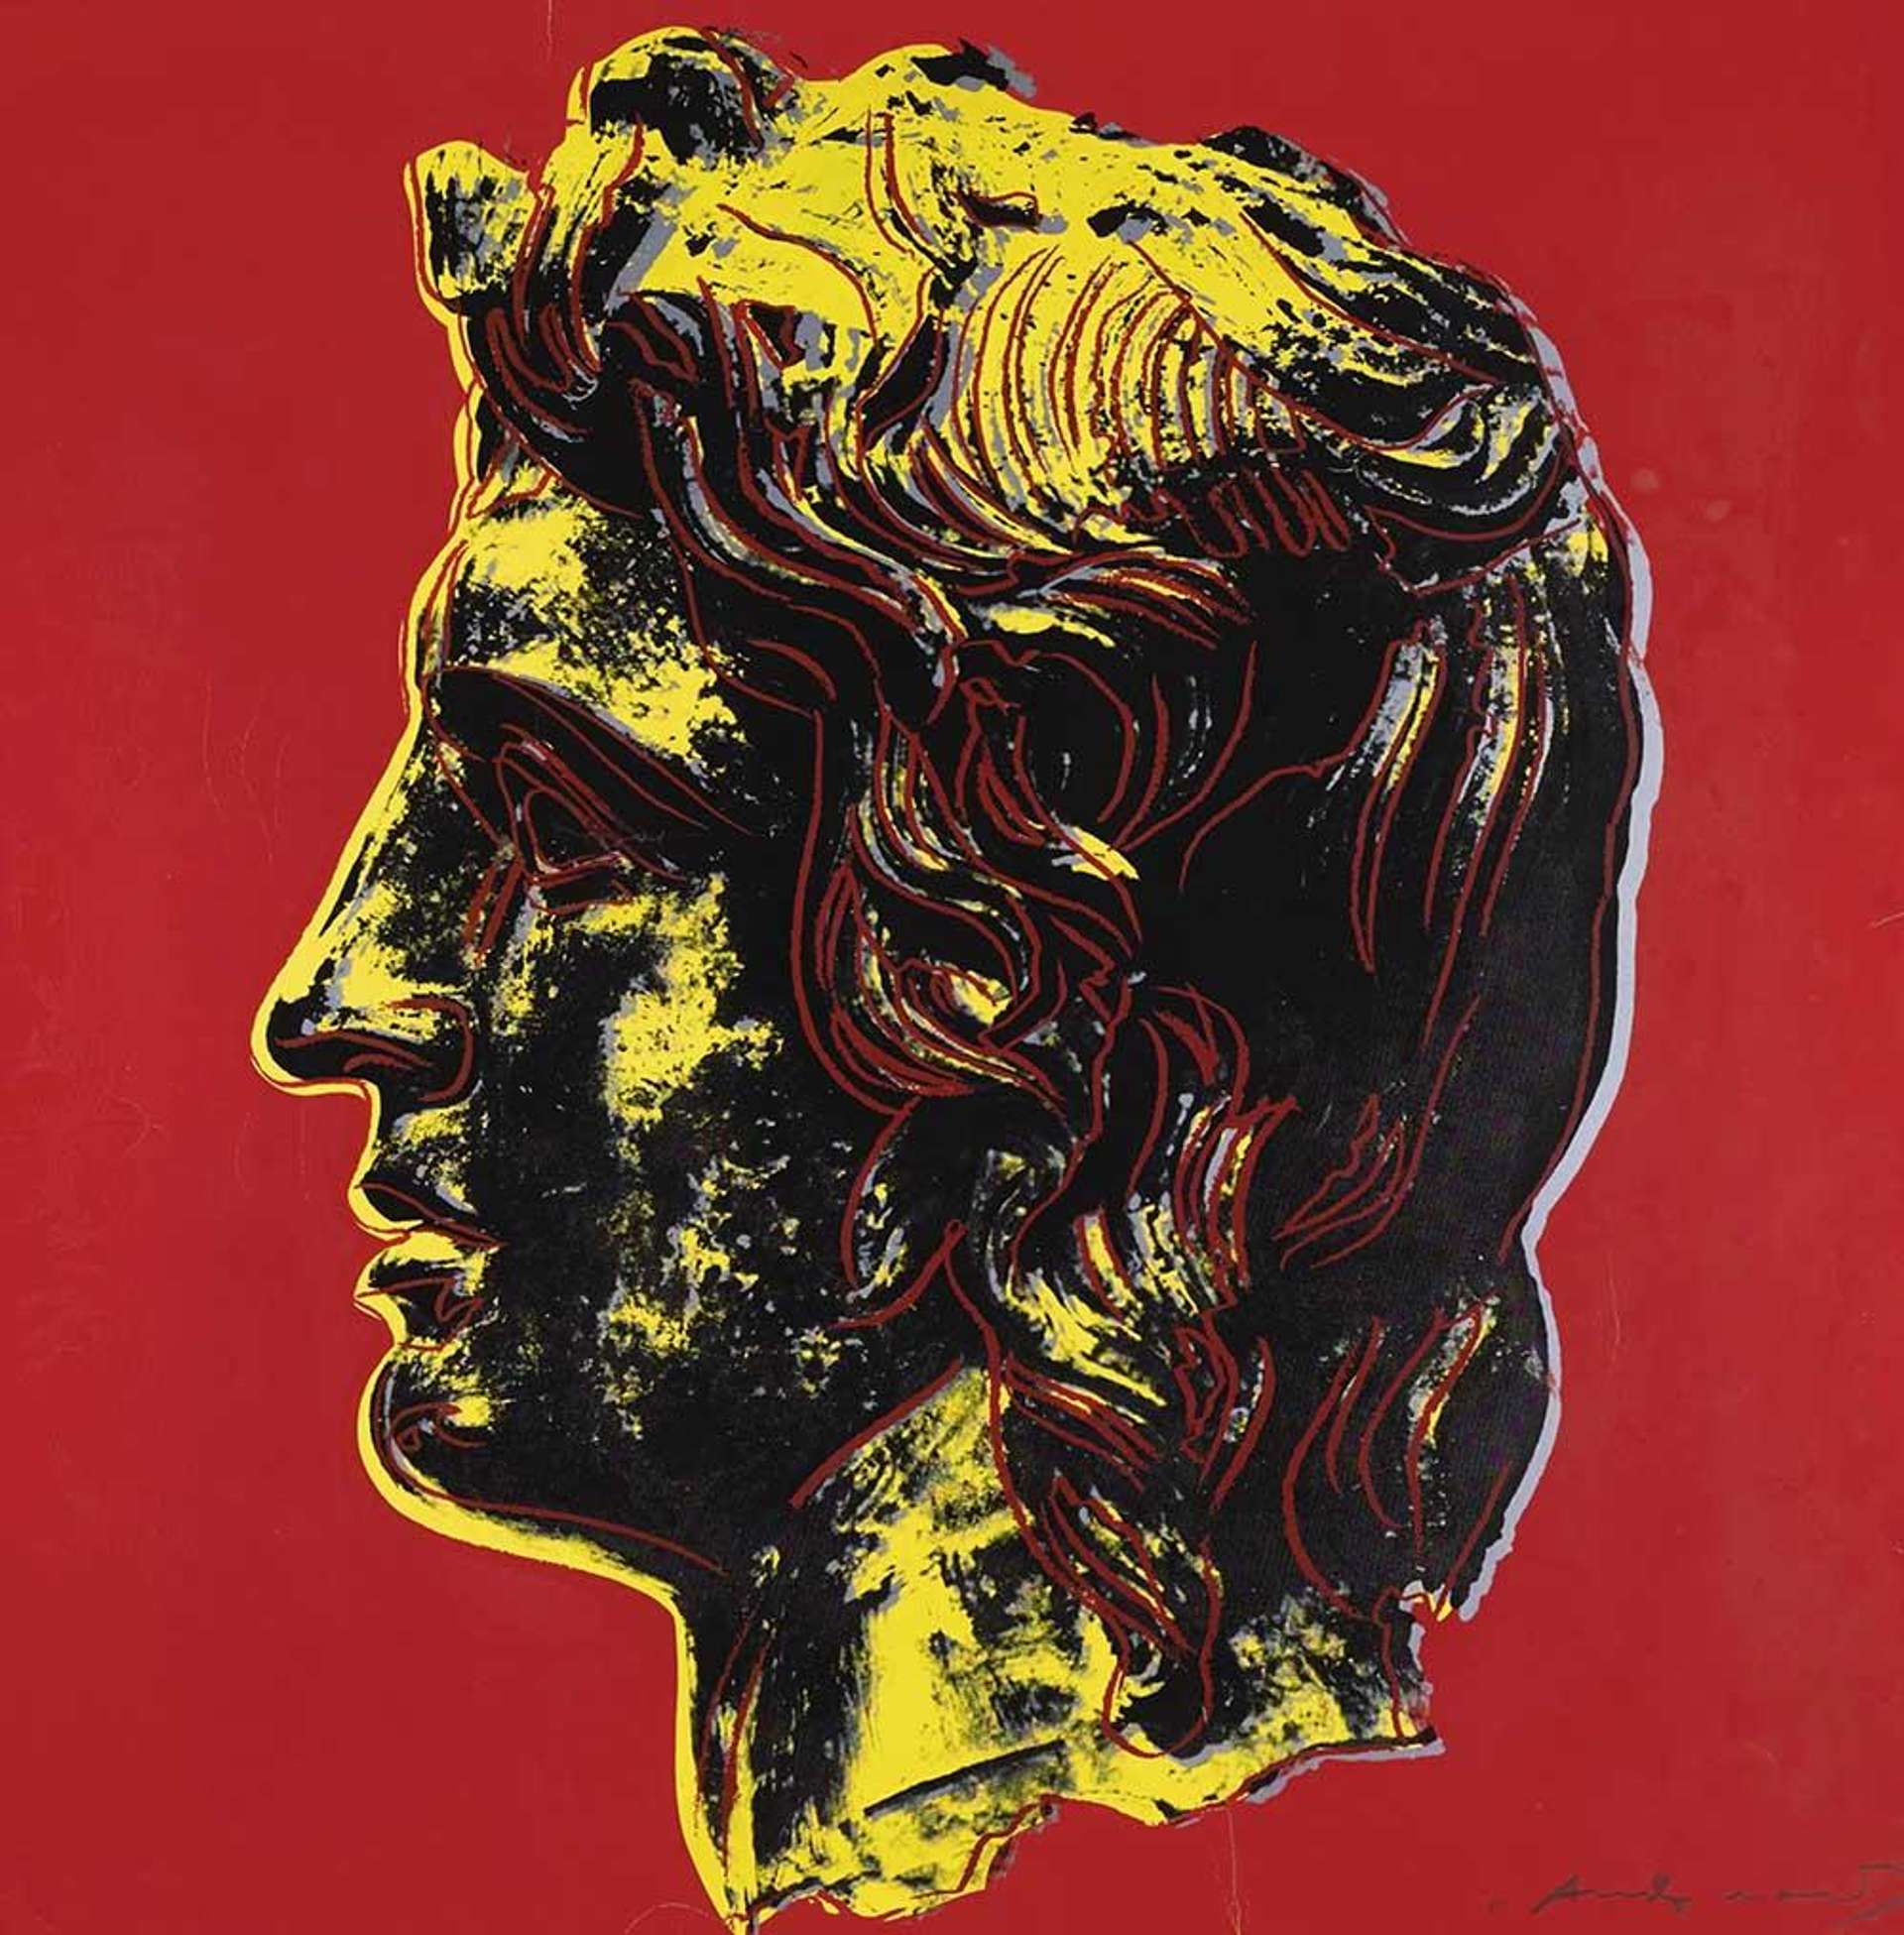 Alexander The Great (F. & S. II.292) by Andy Warhol